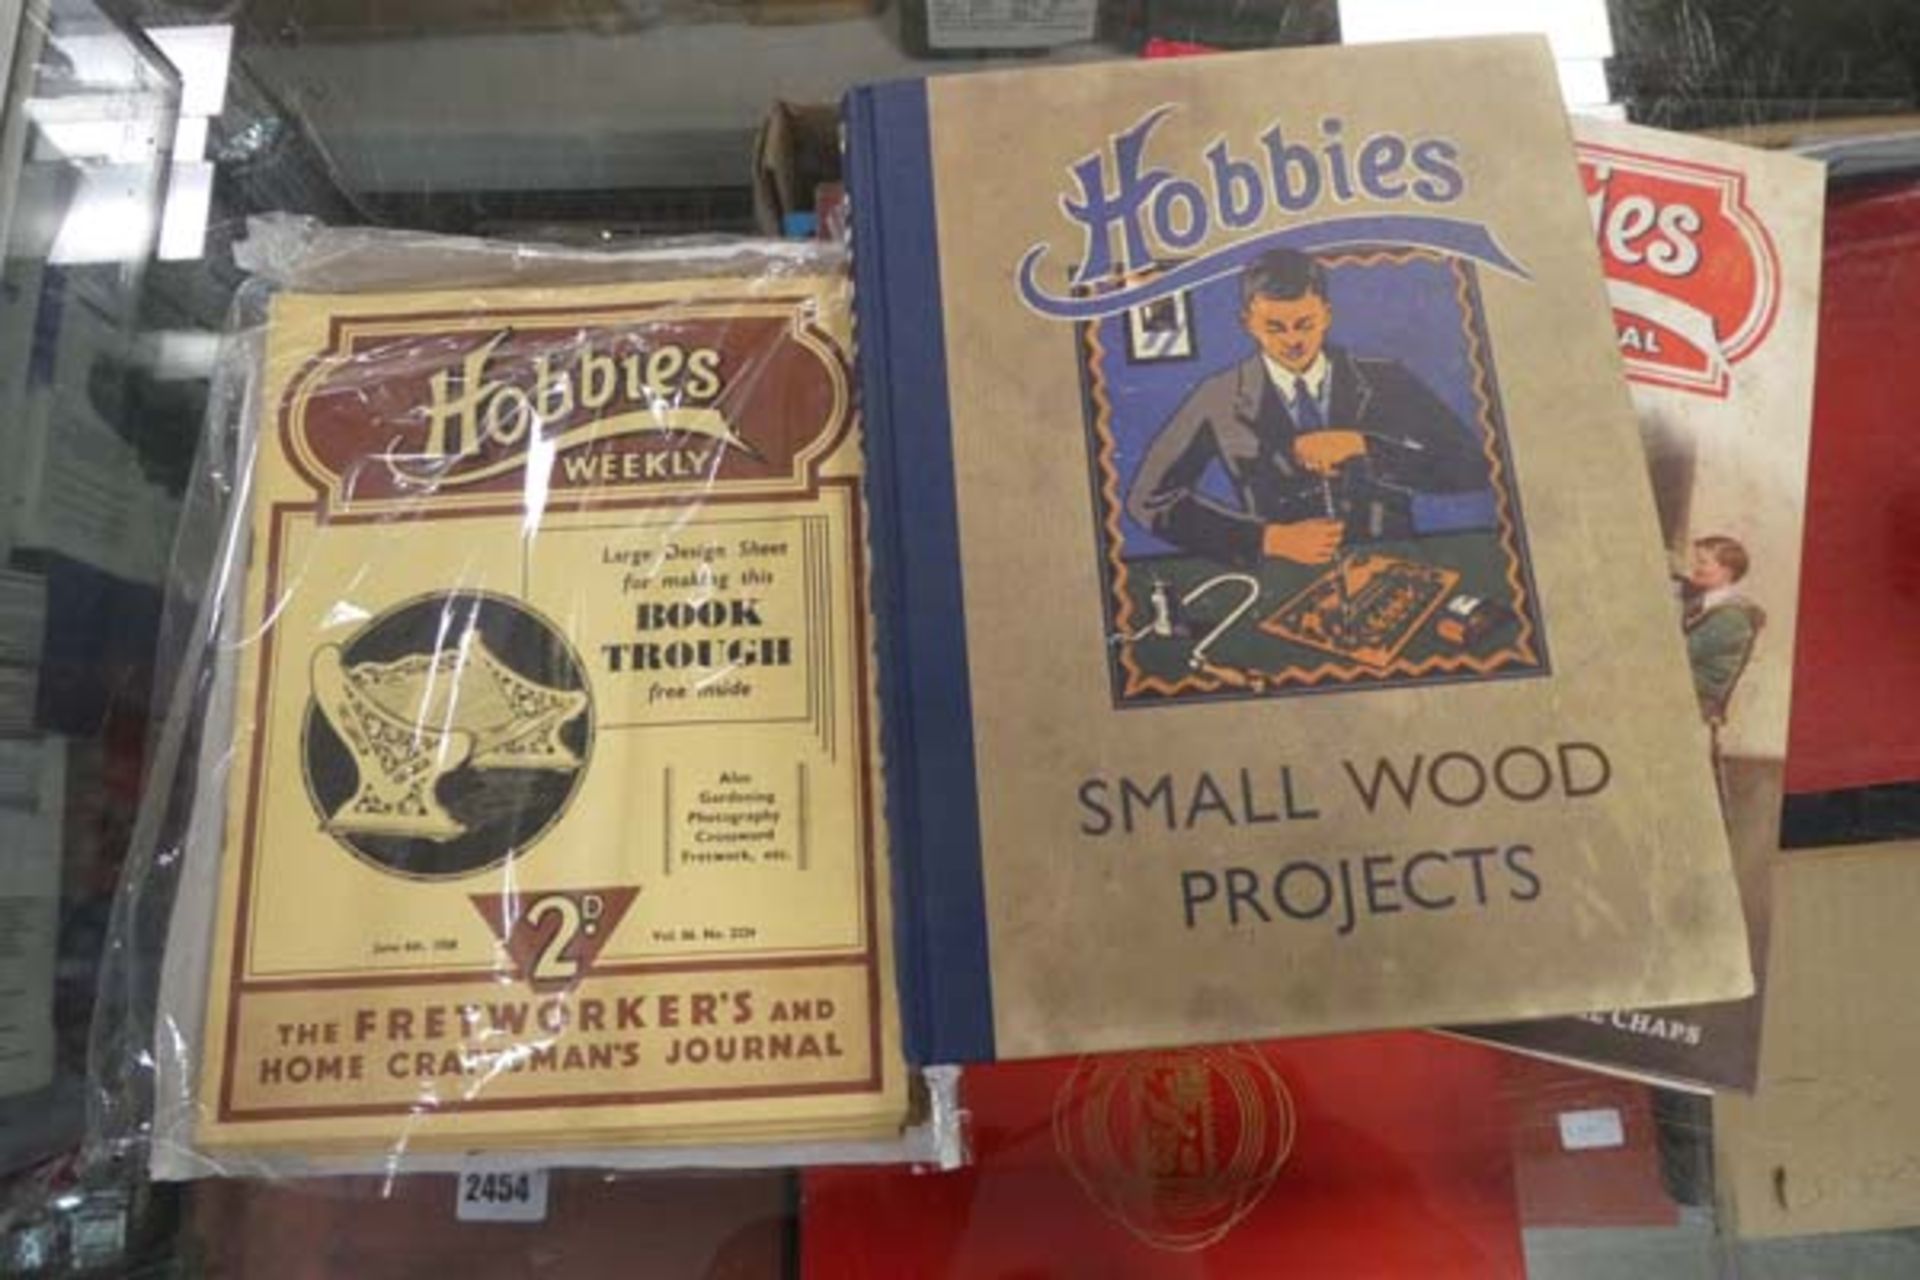 (8) Plastic tray containing a Hobbies annual - Hobbies small wood project book